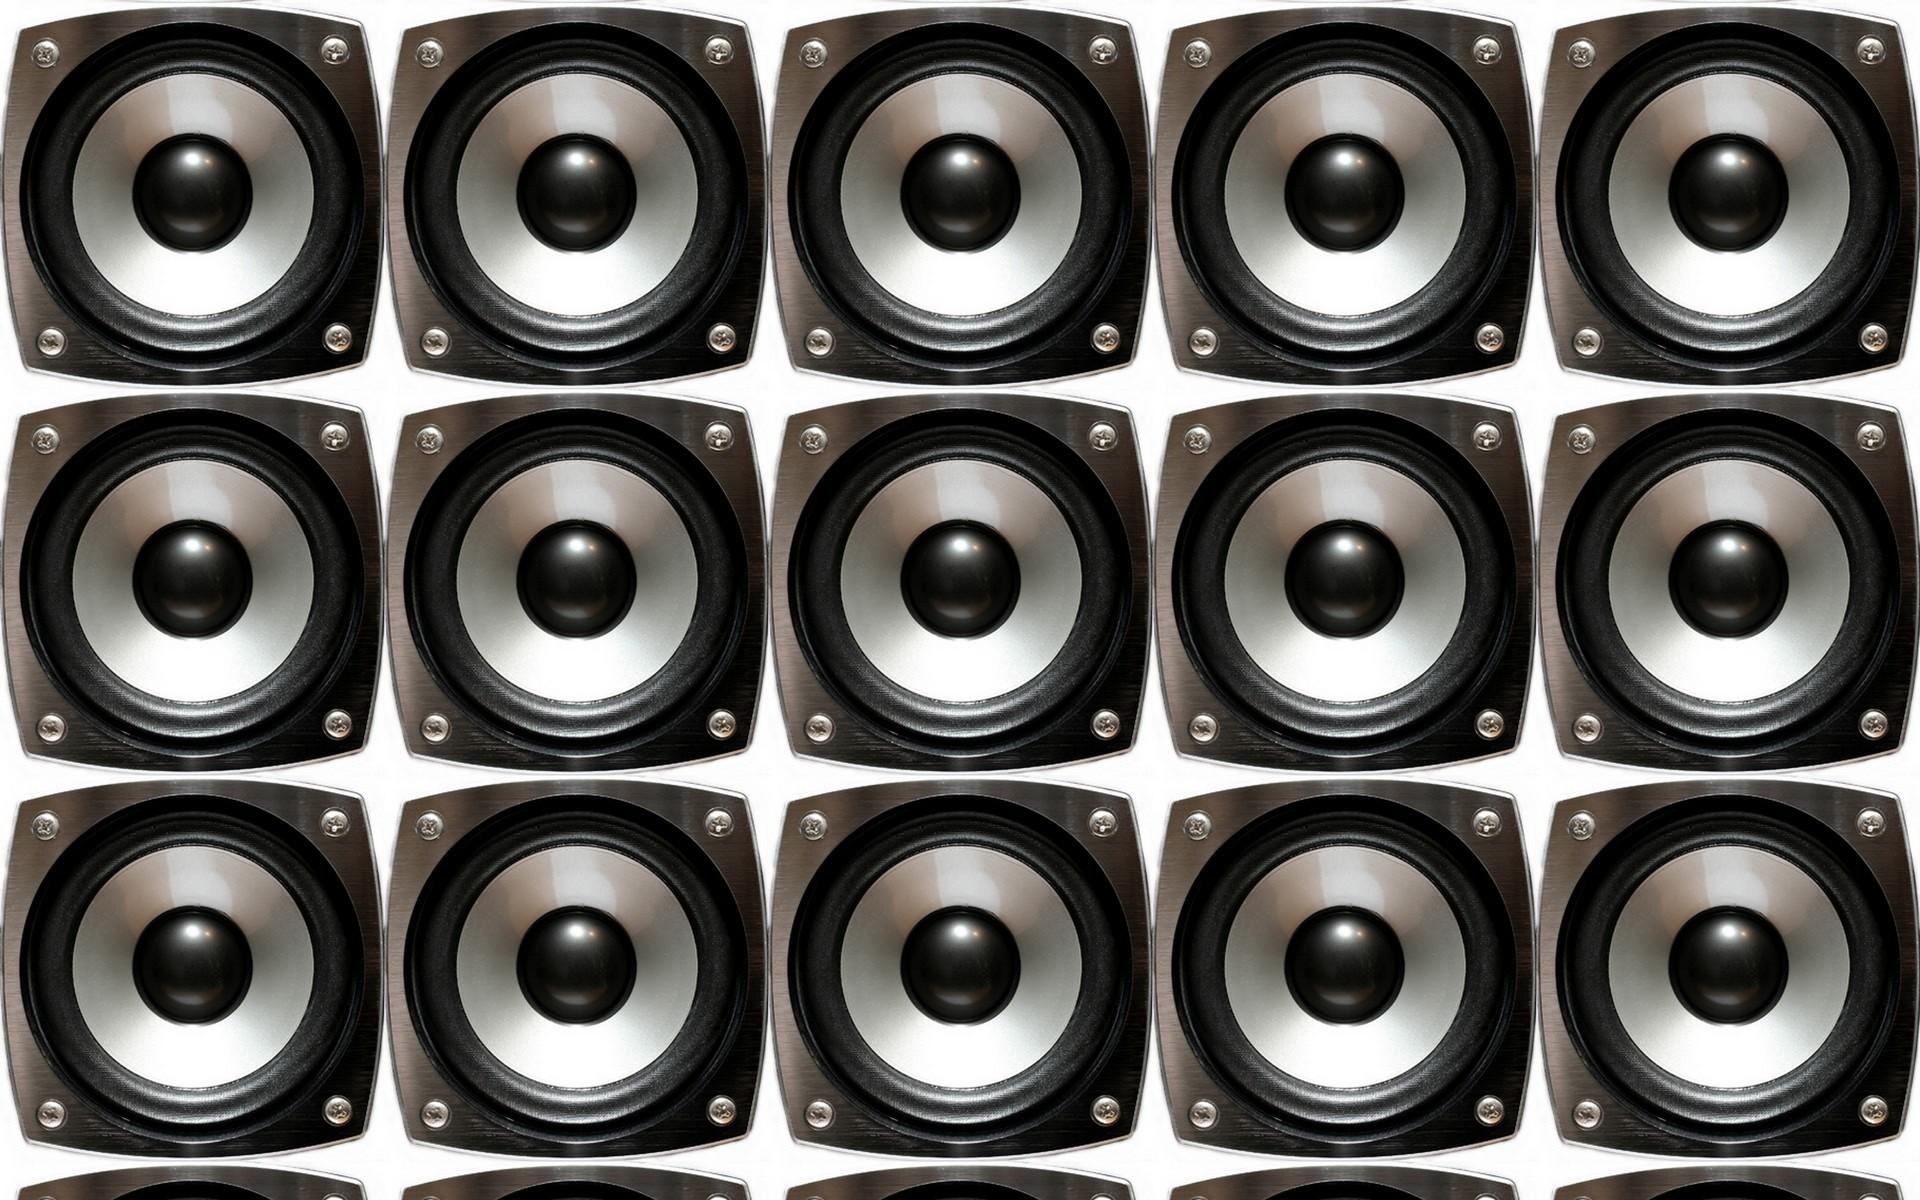 112900 Music Speaker Stock Photos Pictures  RoyaltyFree Images  iStock